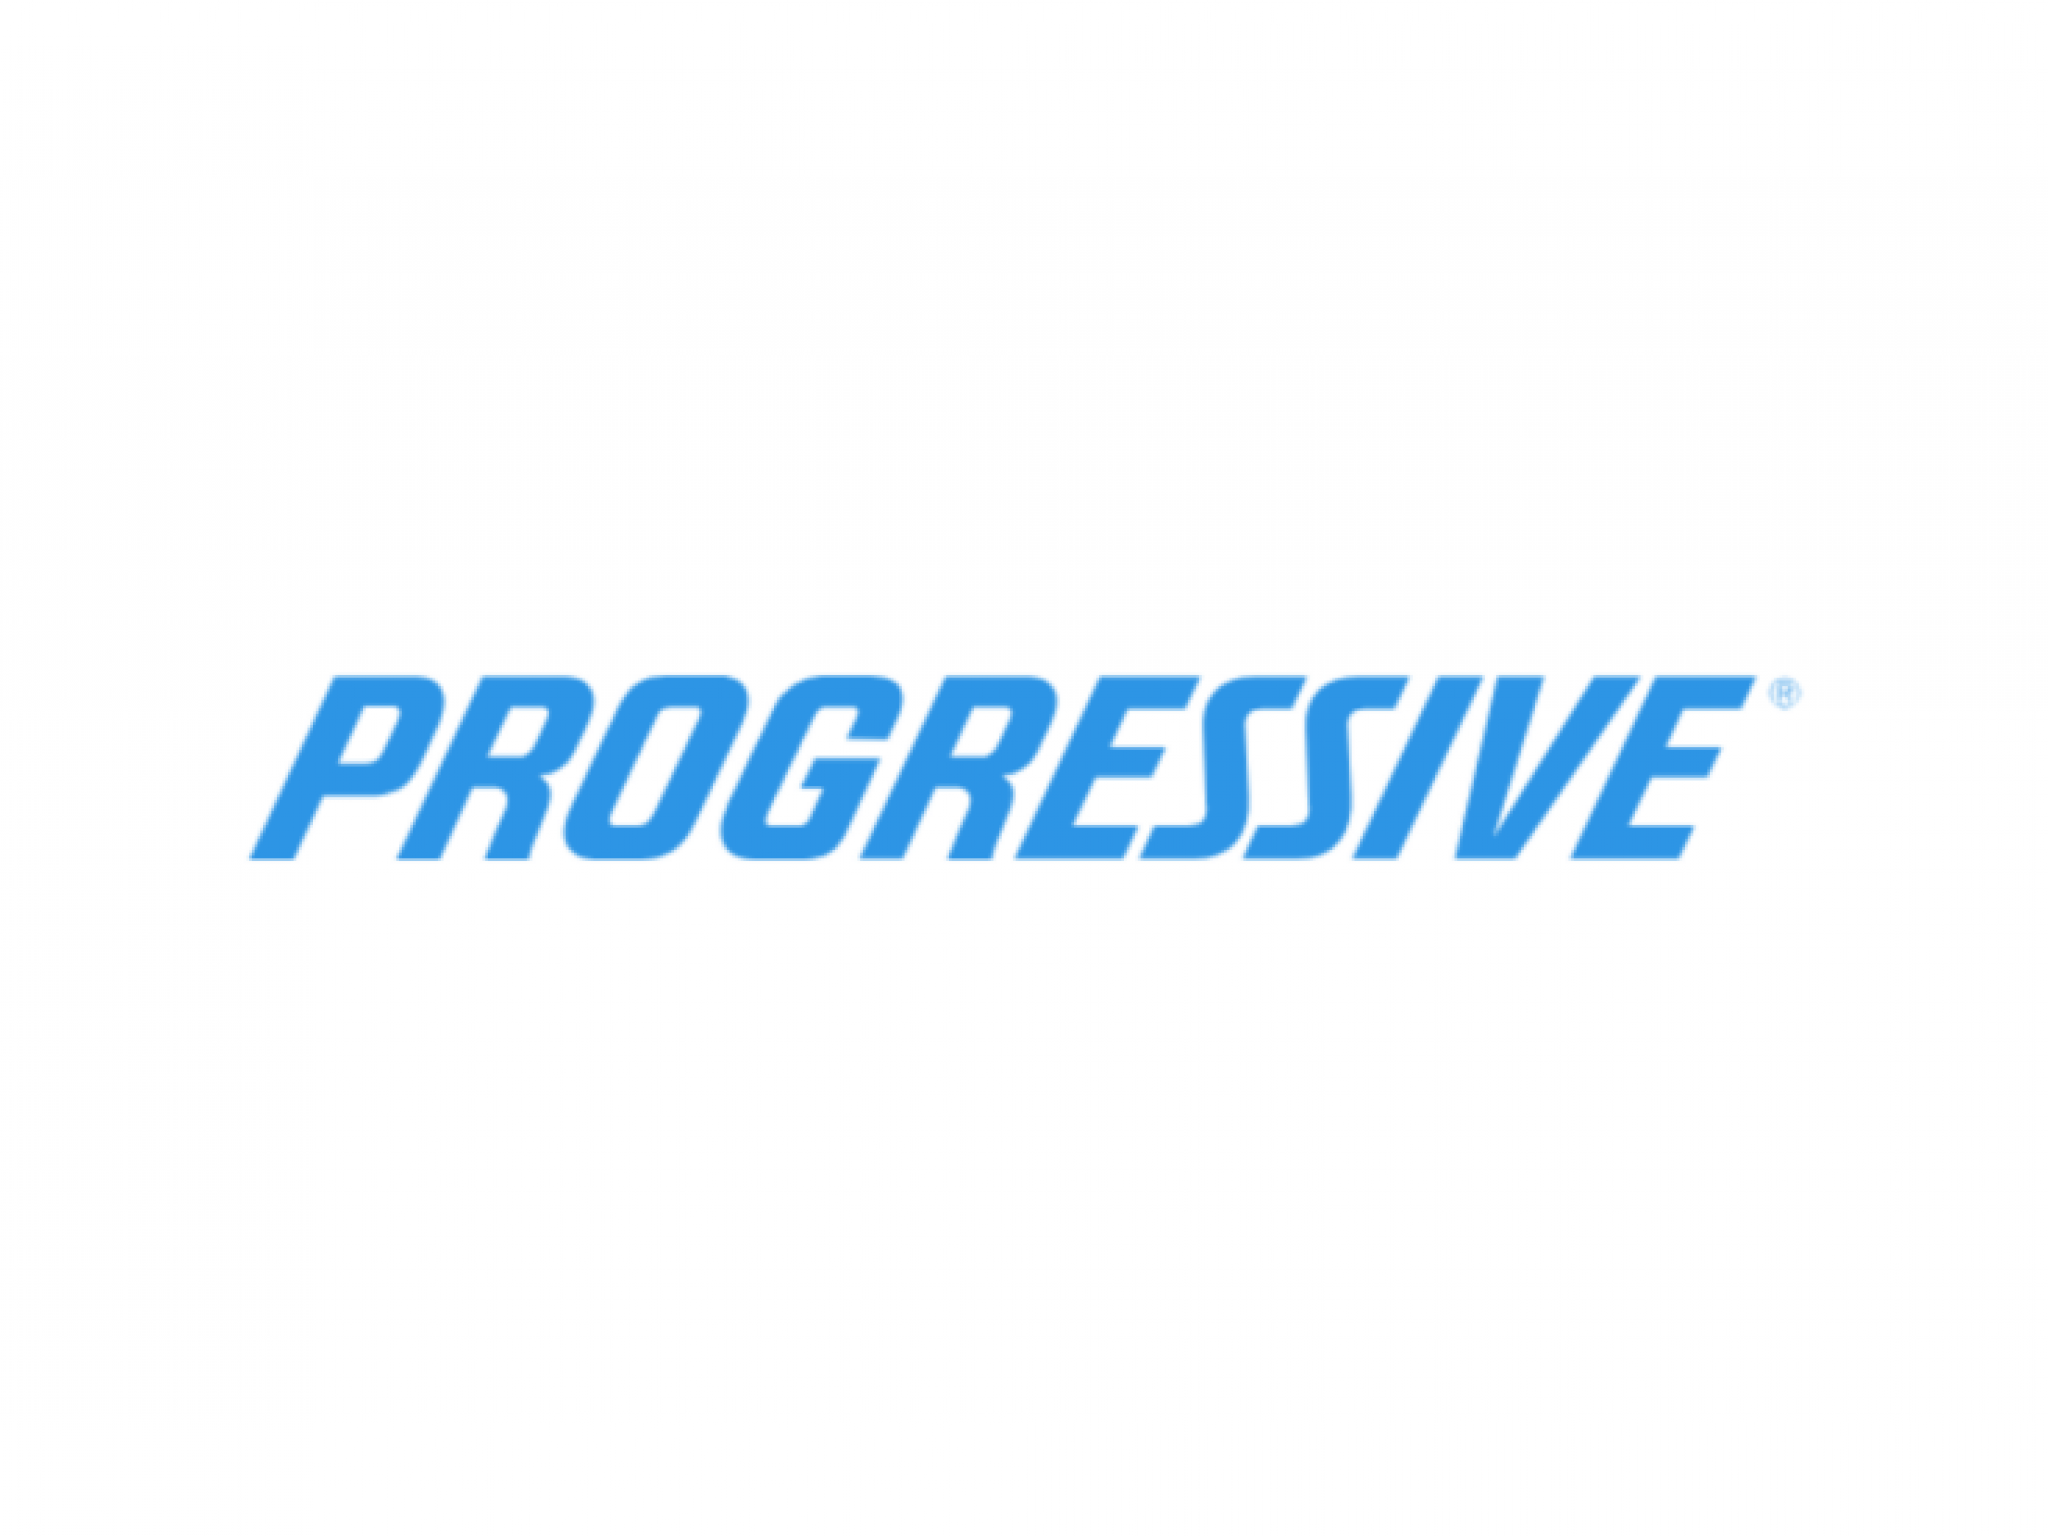  why-is-progressive-corp-stock-trading-higher-today 